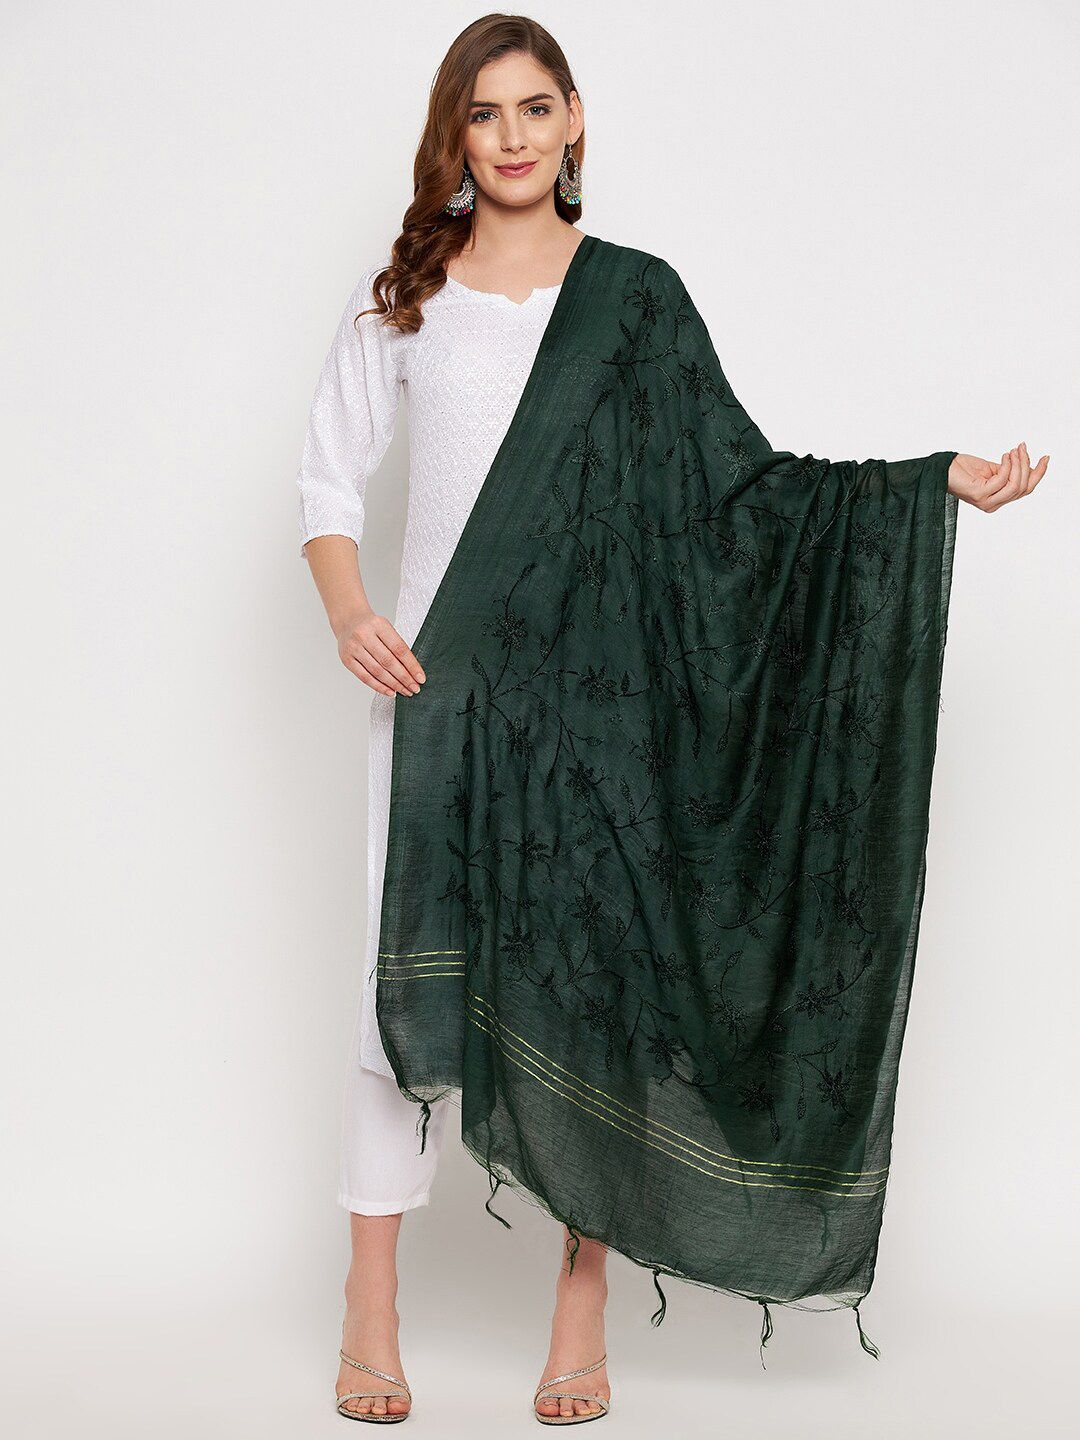 Clora Creation Green Embroidered Dupatta Price in India